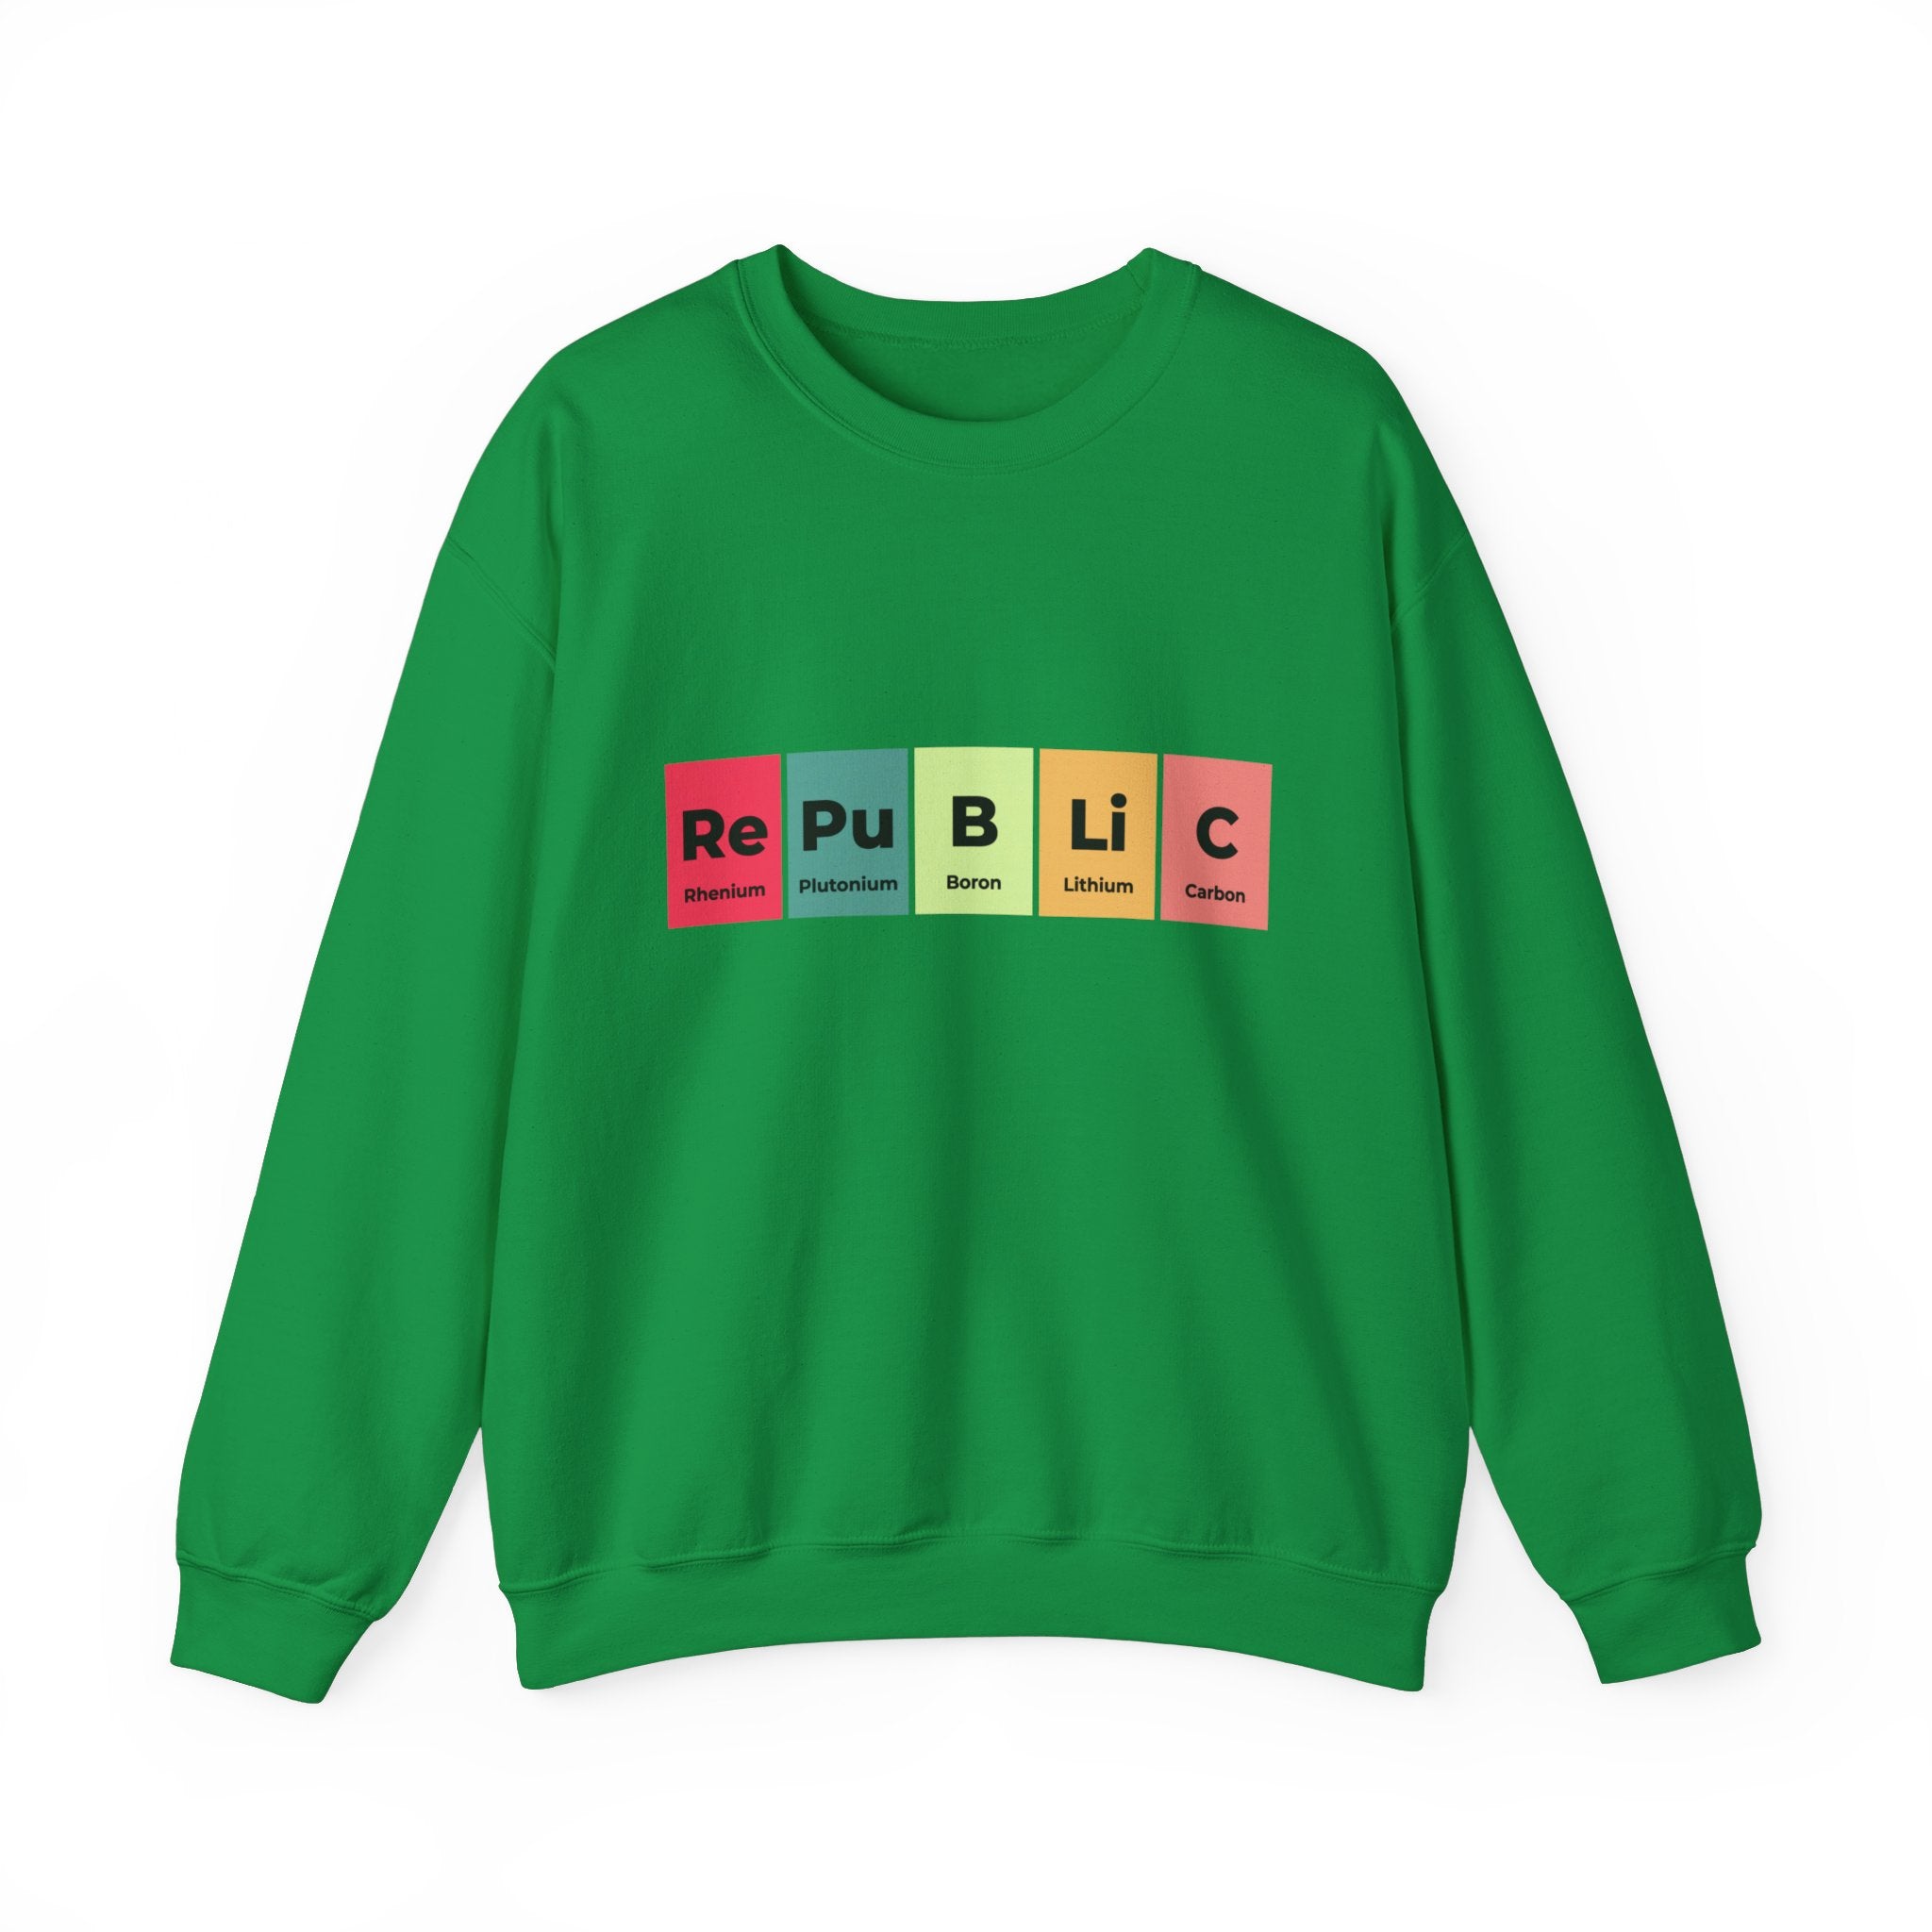 Republic - Sweatshirt in green with colorful periodic table elements spelling "Republic" on the front, perfect for winter fashion.